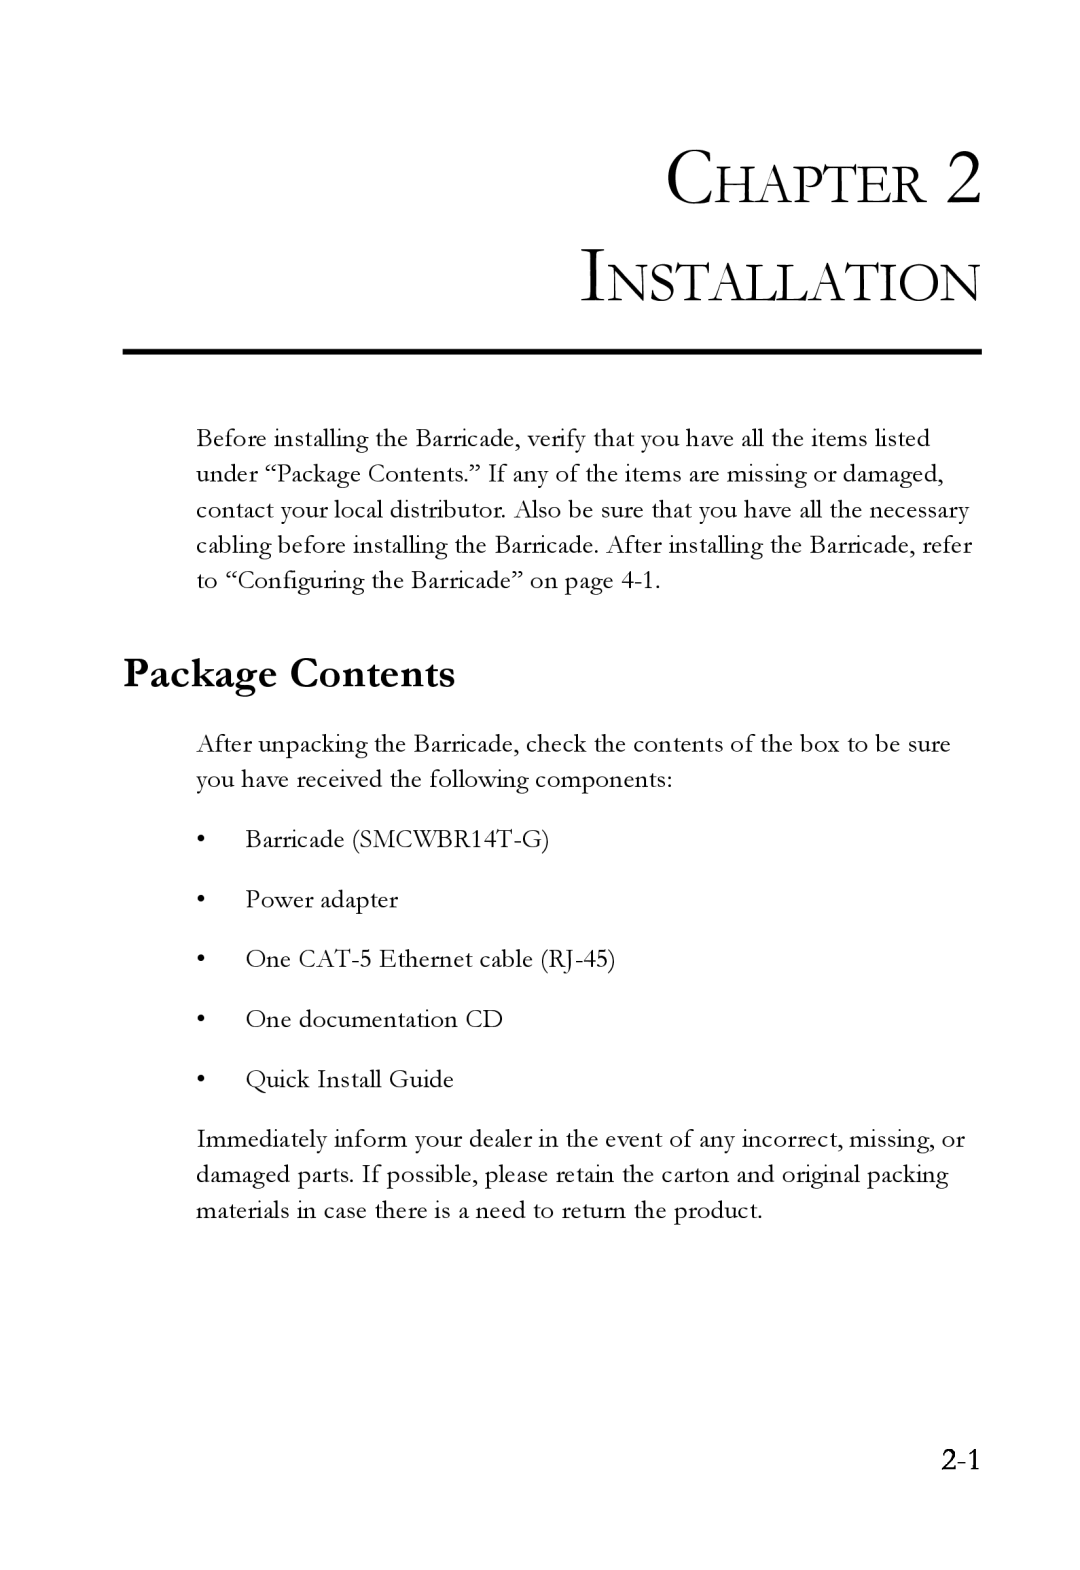 SMC Networks SMCWBR14T-G manual Chapter Installation, Package Contents 